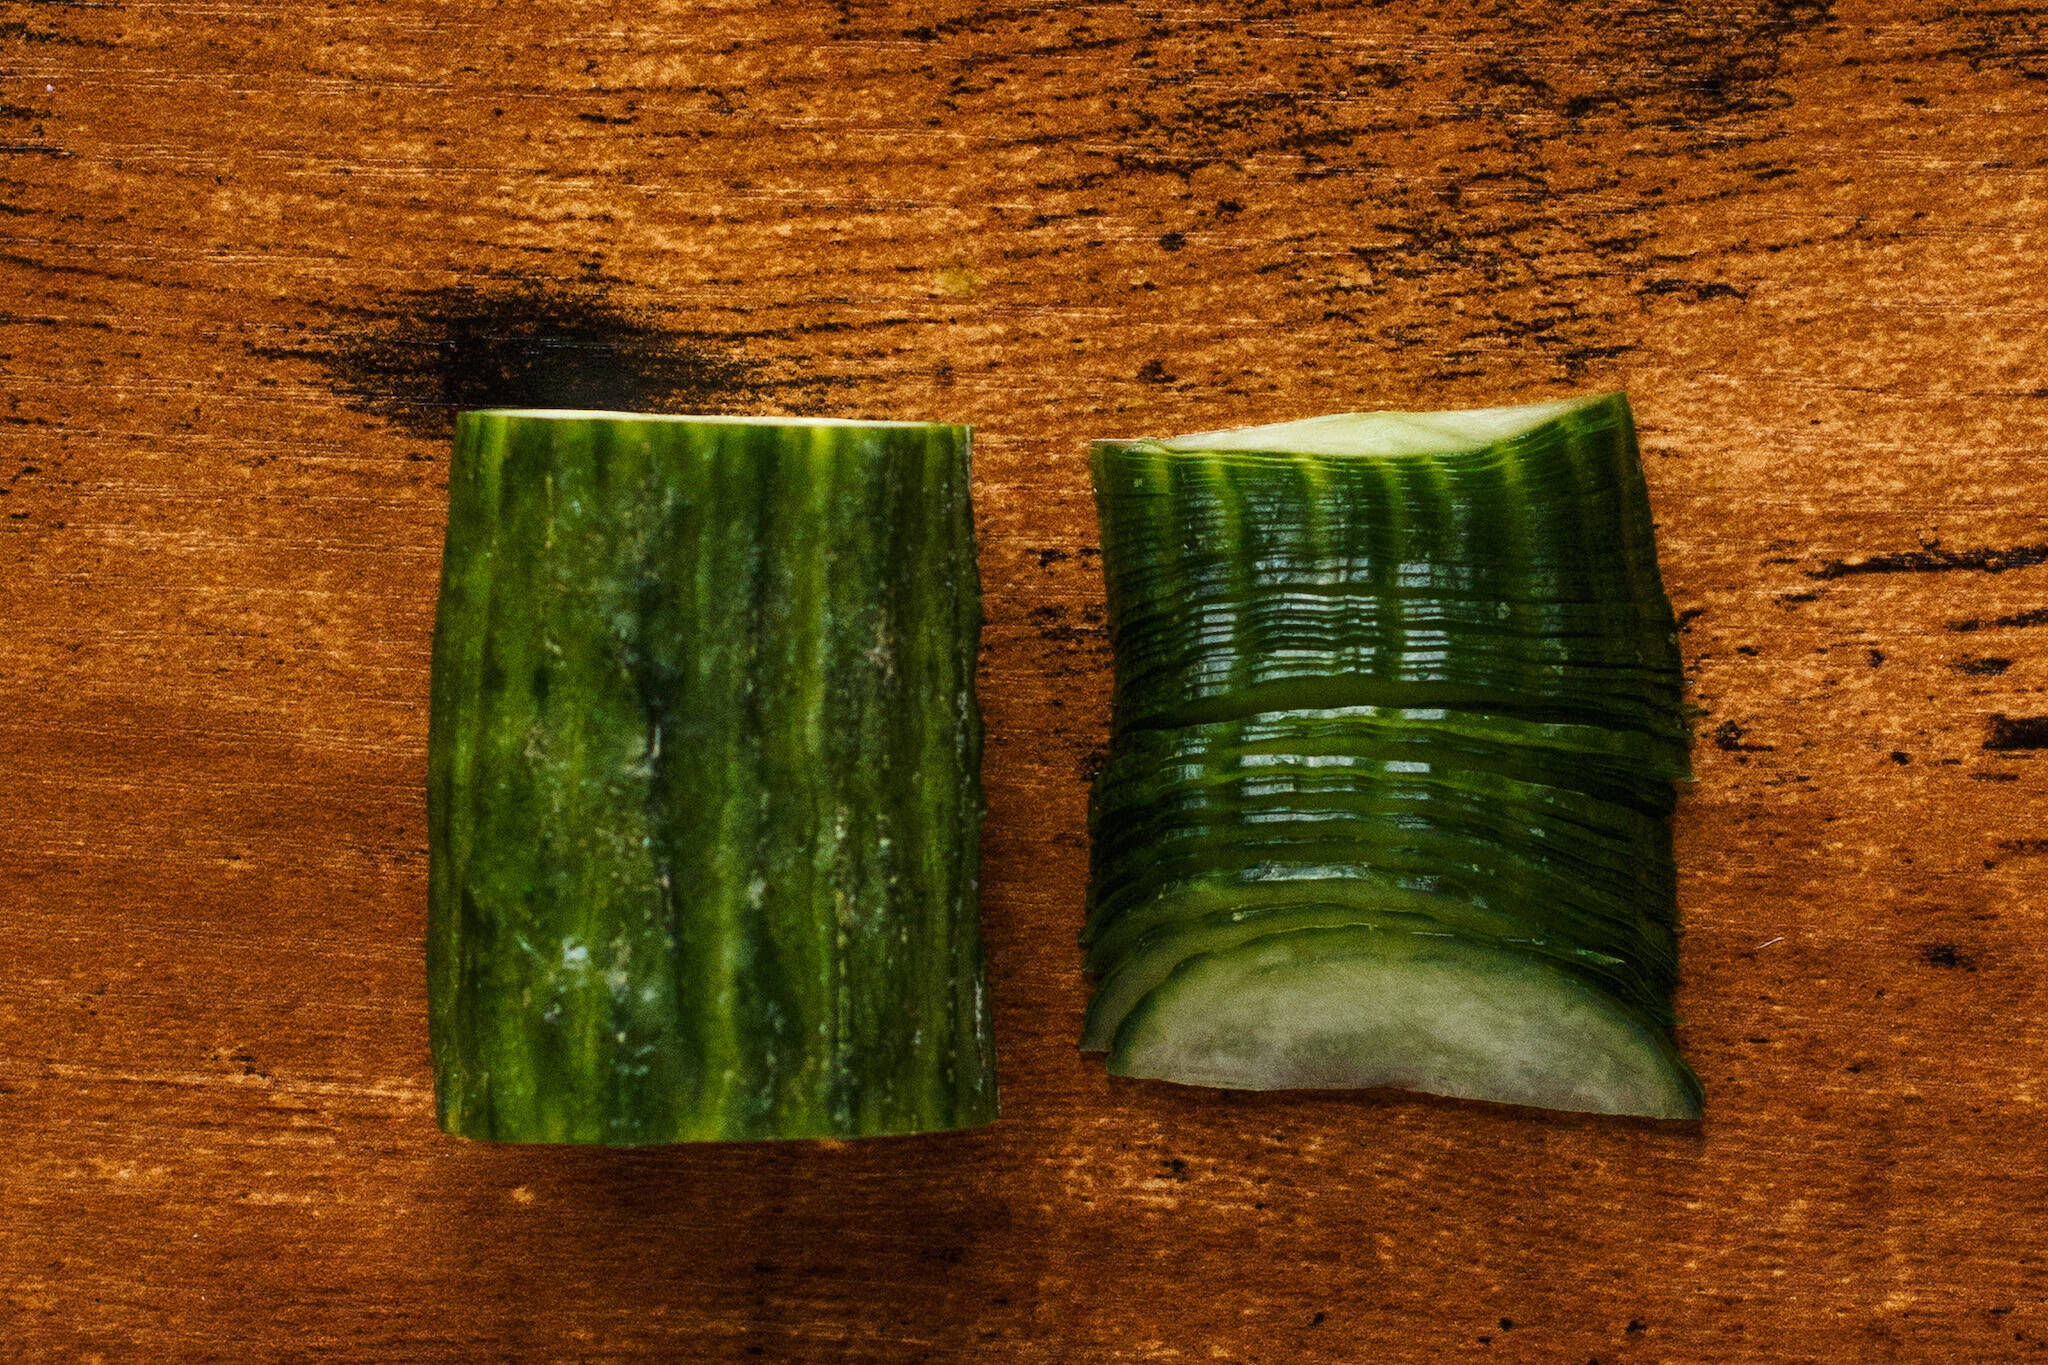 Most slices of cucumber sliced in 30 seconds - 166 by Wallace Wong